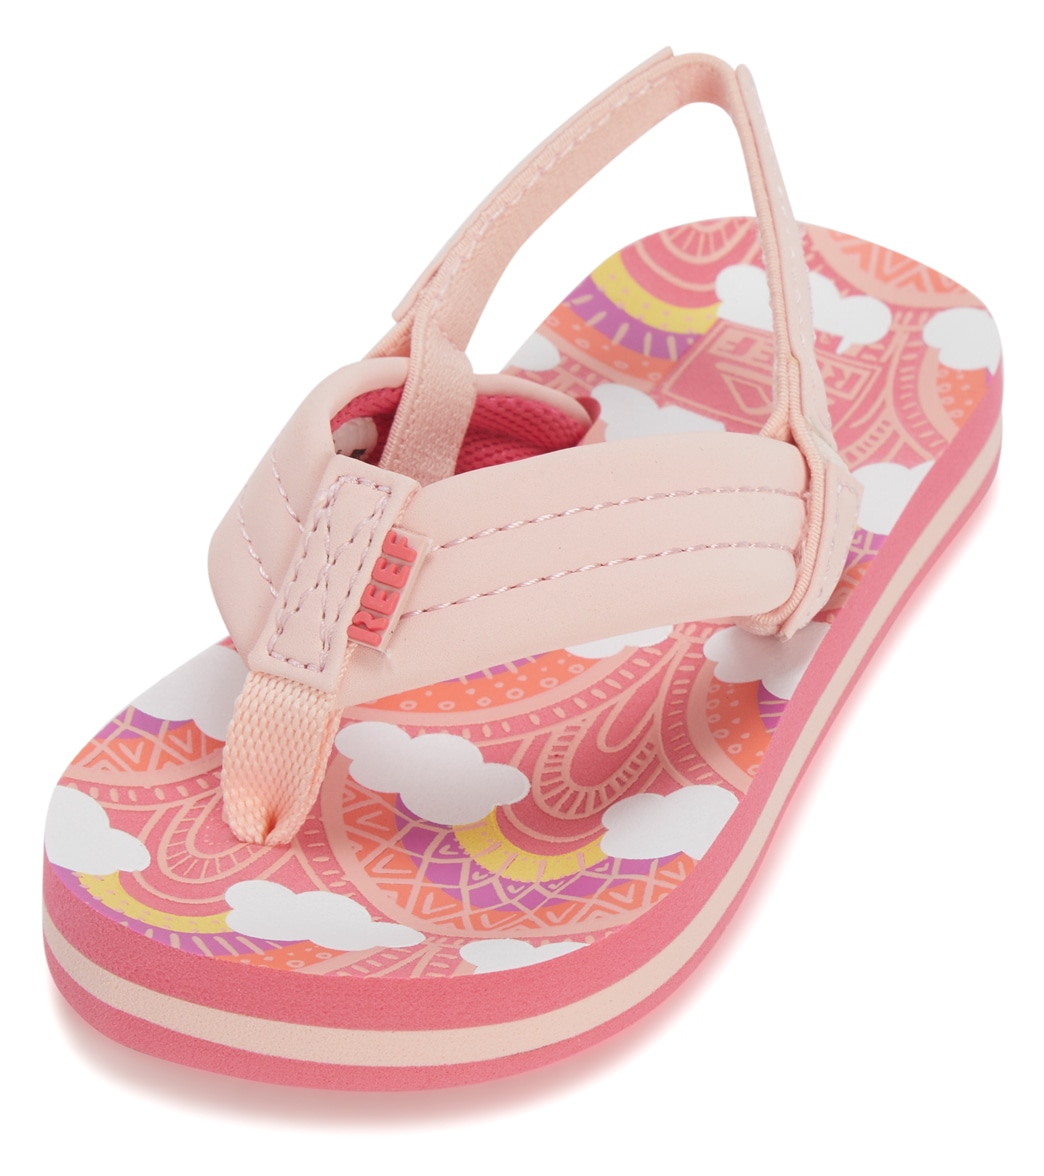 Reef Boys' Ahi Sandals - Rainbows And Clouds 11/12 Eva/Foam/Polyester - Swimoutlet.com